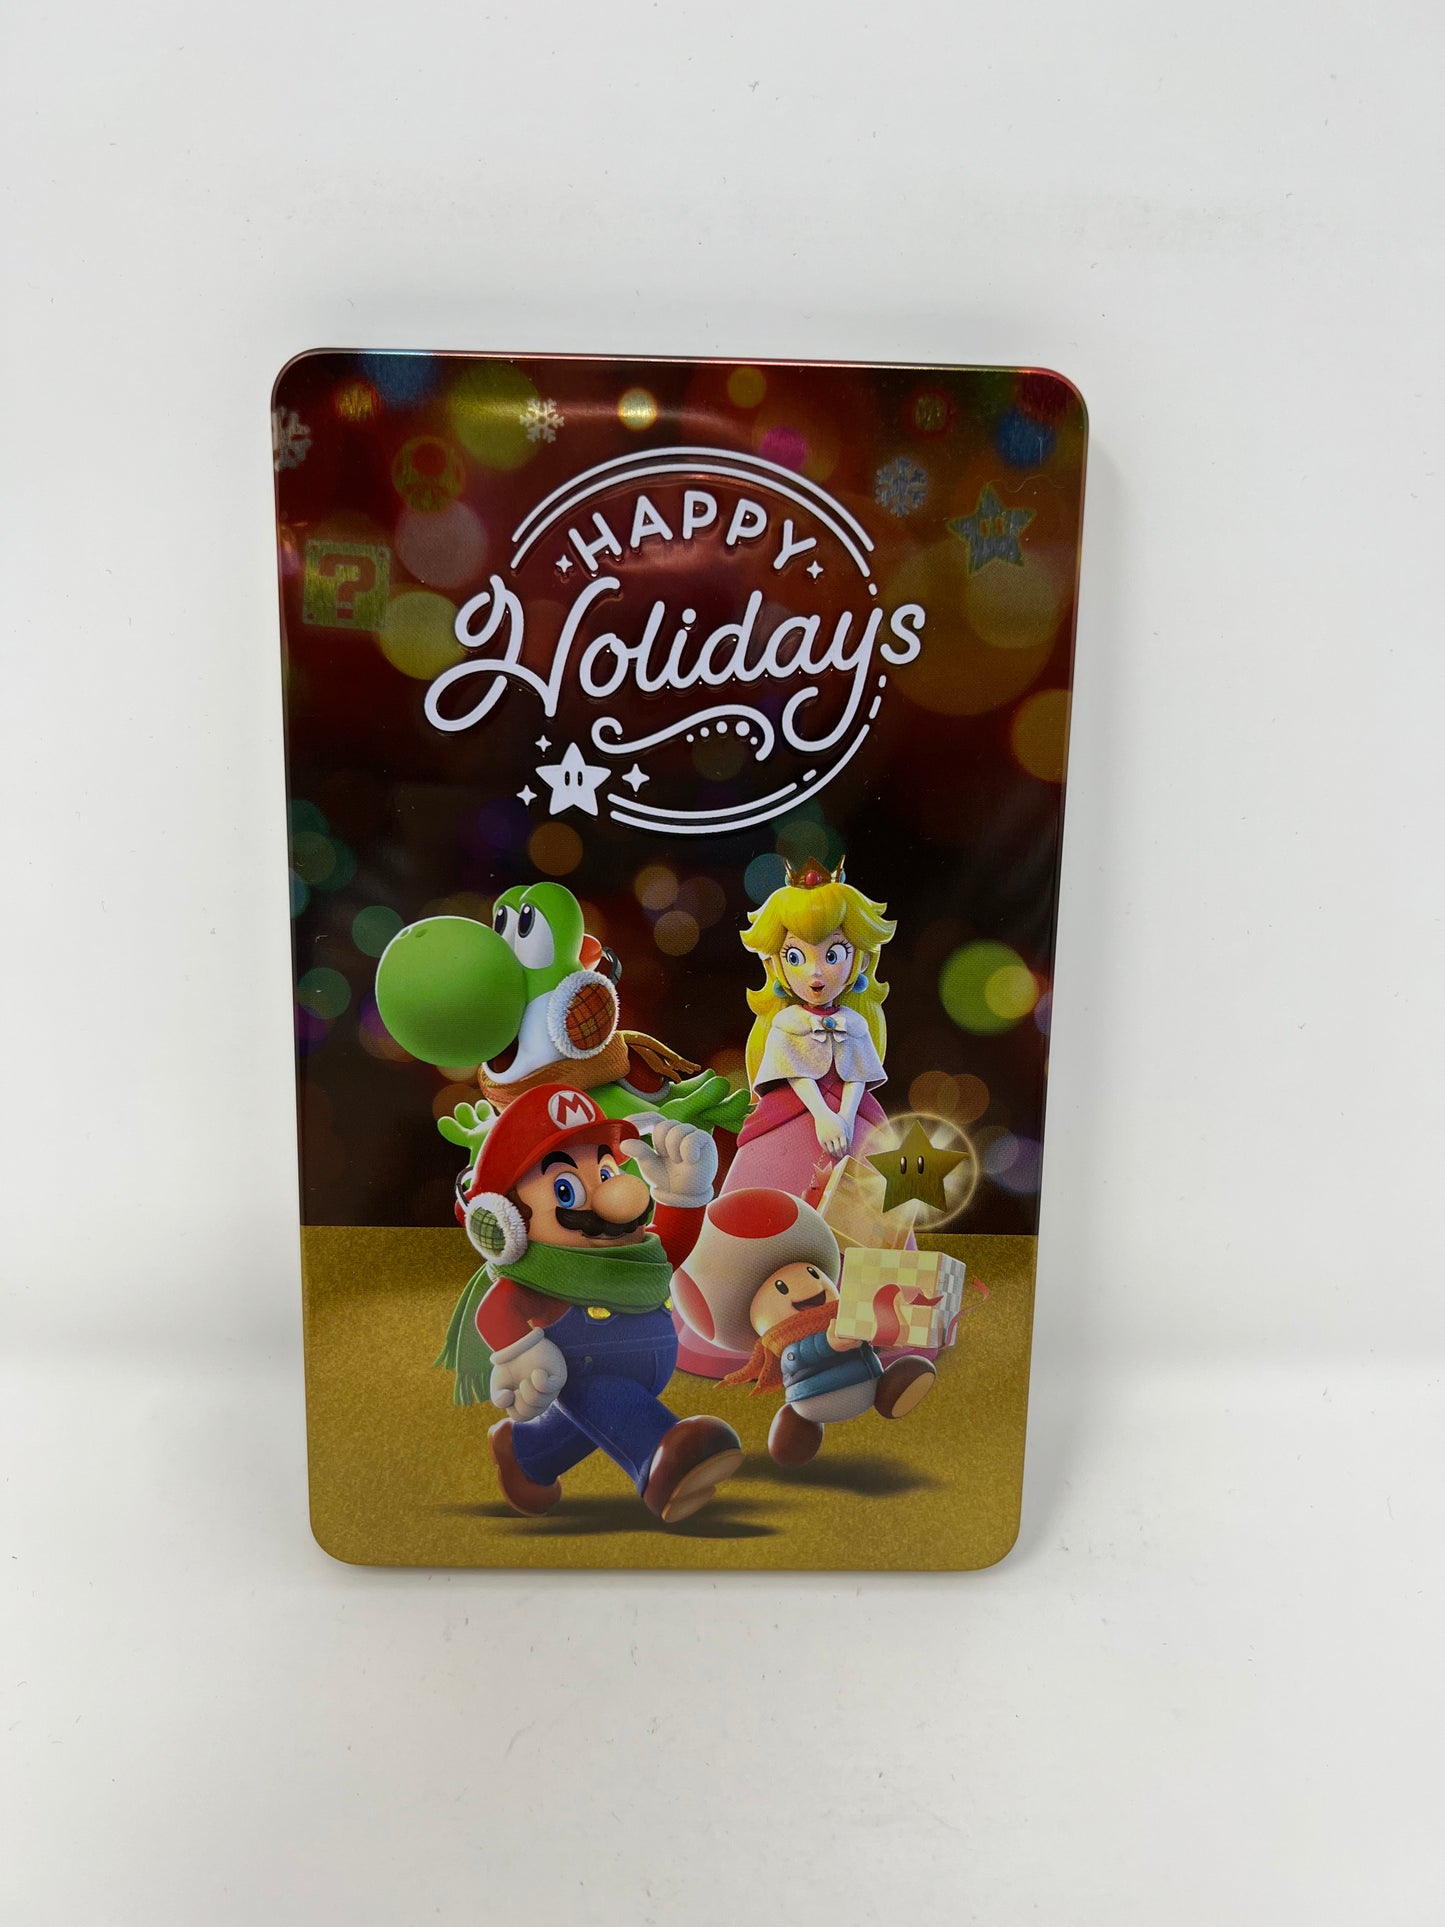 Happy Holidays Steel Book - Switch - Used